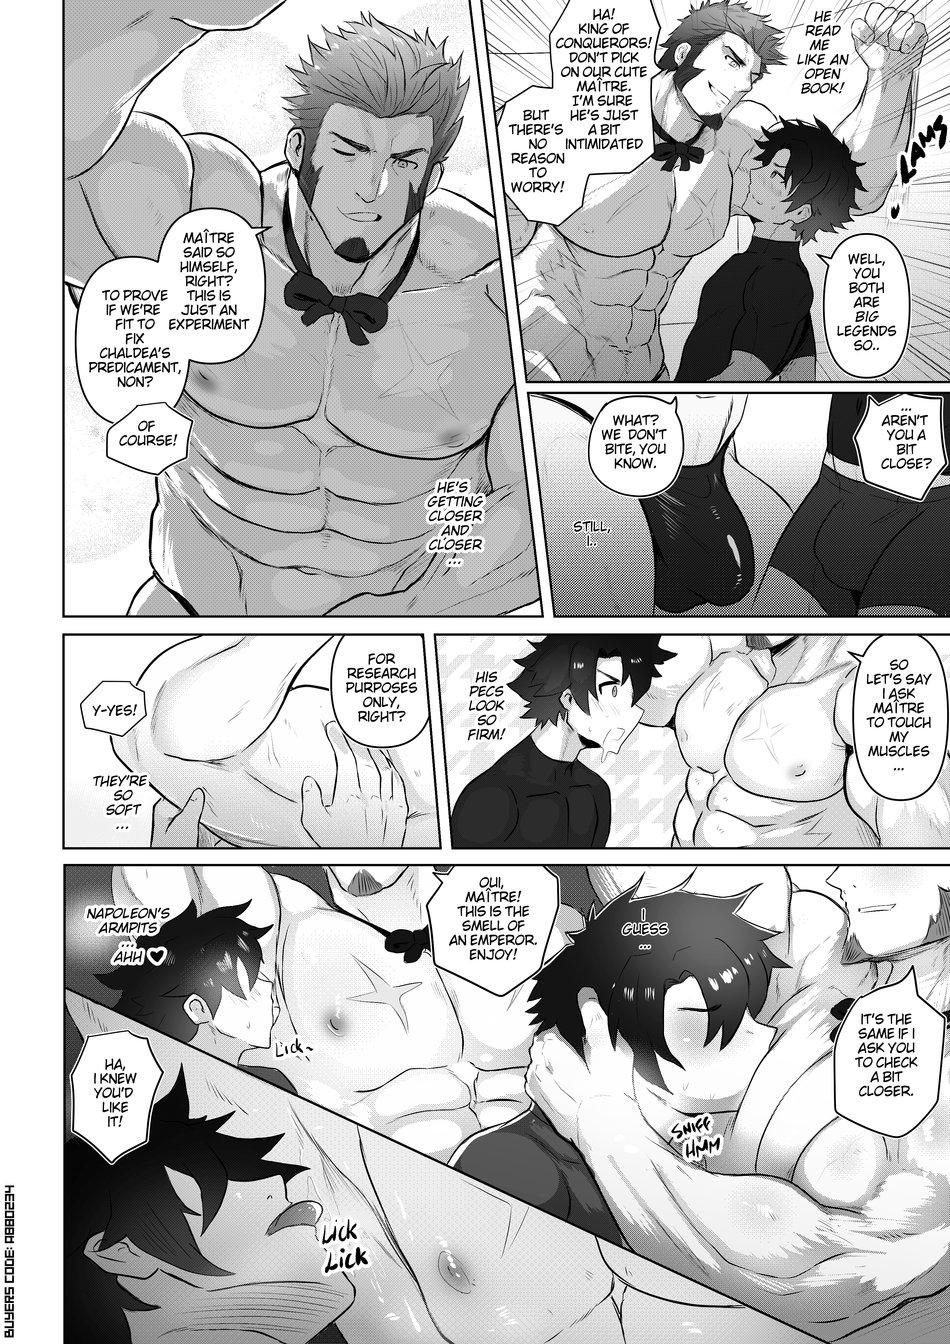 Softcore Triple Threat - Fate Grand Order - Fate grand order Boy - Page 3